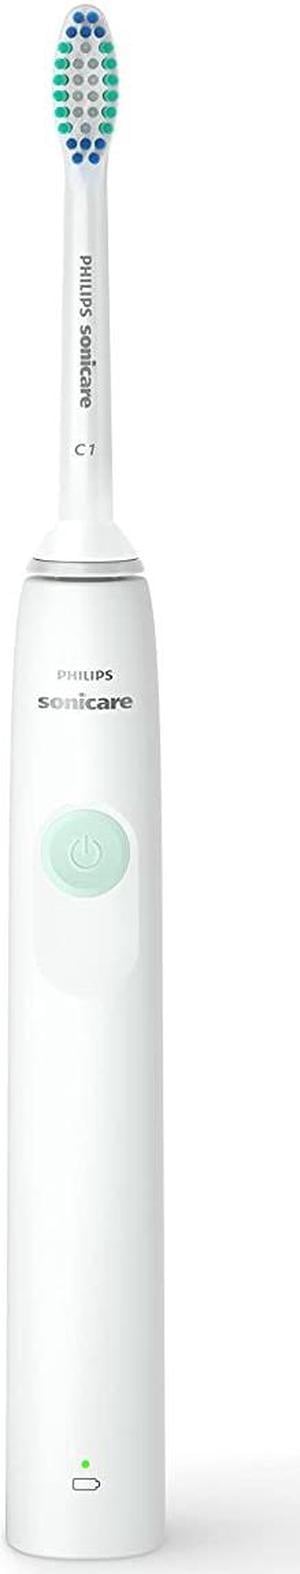 Philips Sonicare 2100 Power Toothbrush, Rechargeable Electric Toothbrush, White Mint, (HX3661/04)